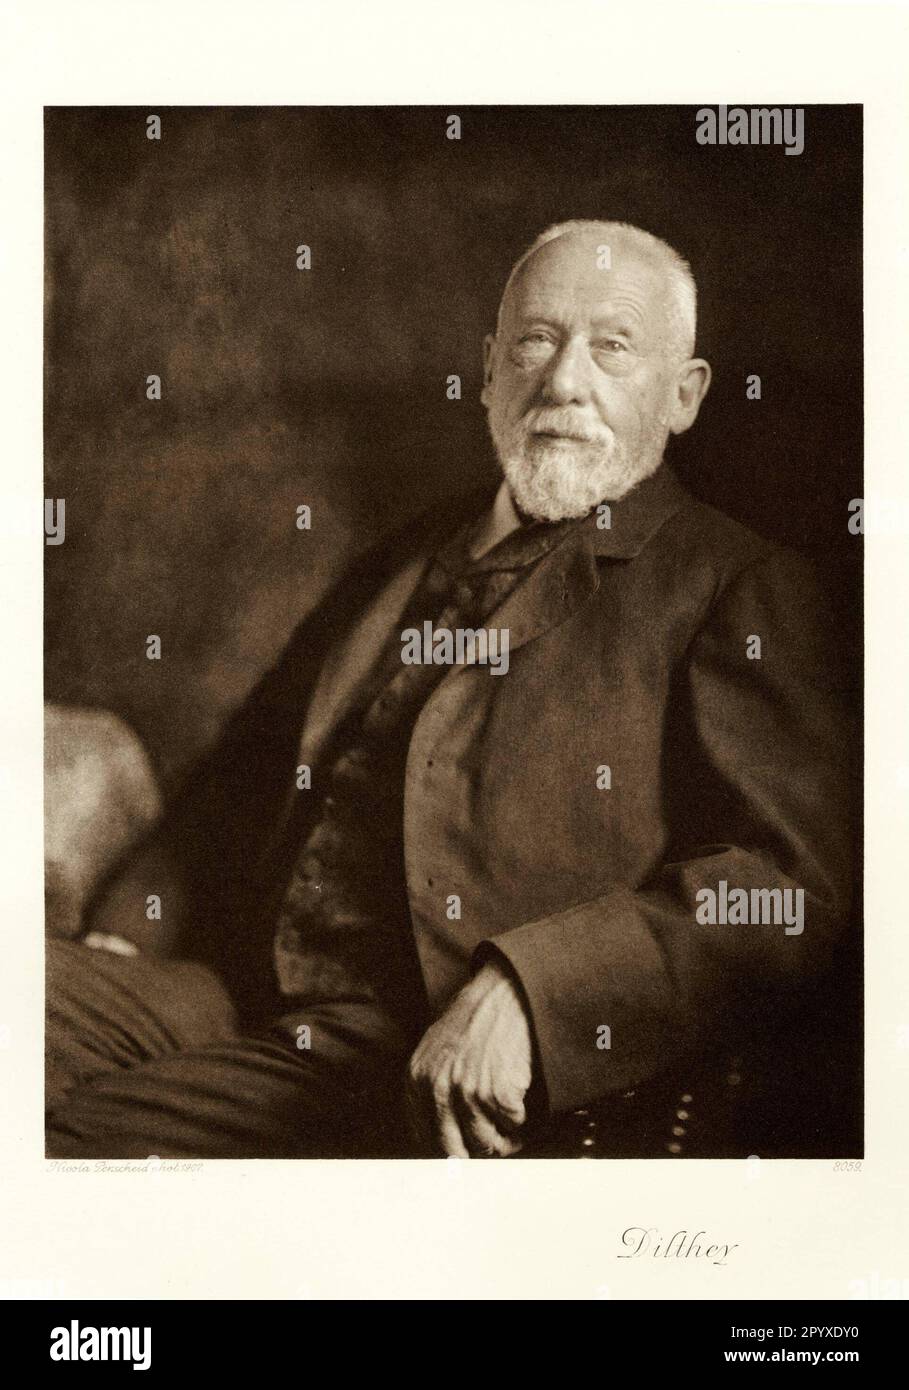 Wilhelm Dilthey (1833-1911), German philosopher. Photograph by Nicola Perscheid from 1907. Photo: Heliogravure, Corpus Imaginum, Hanfstaengl Collection. [automated translation] Stock Photo